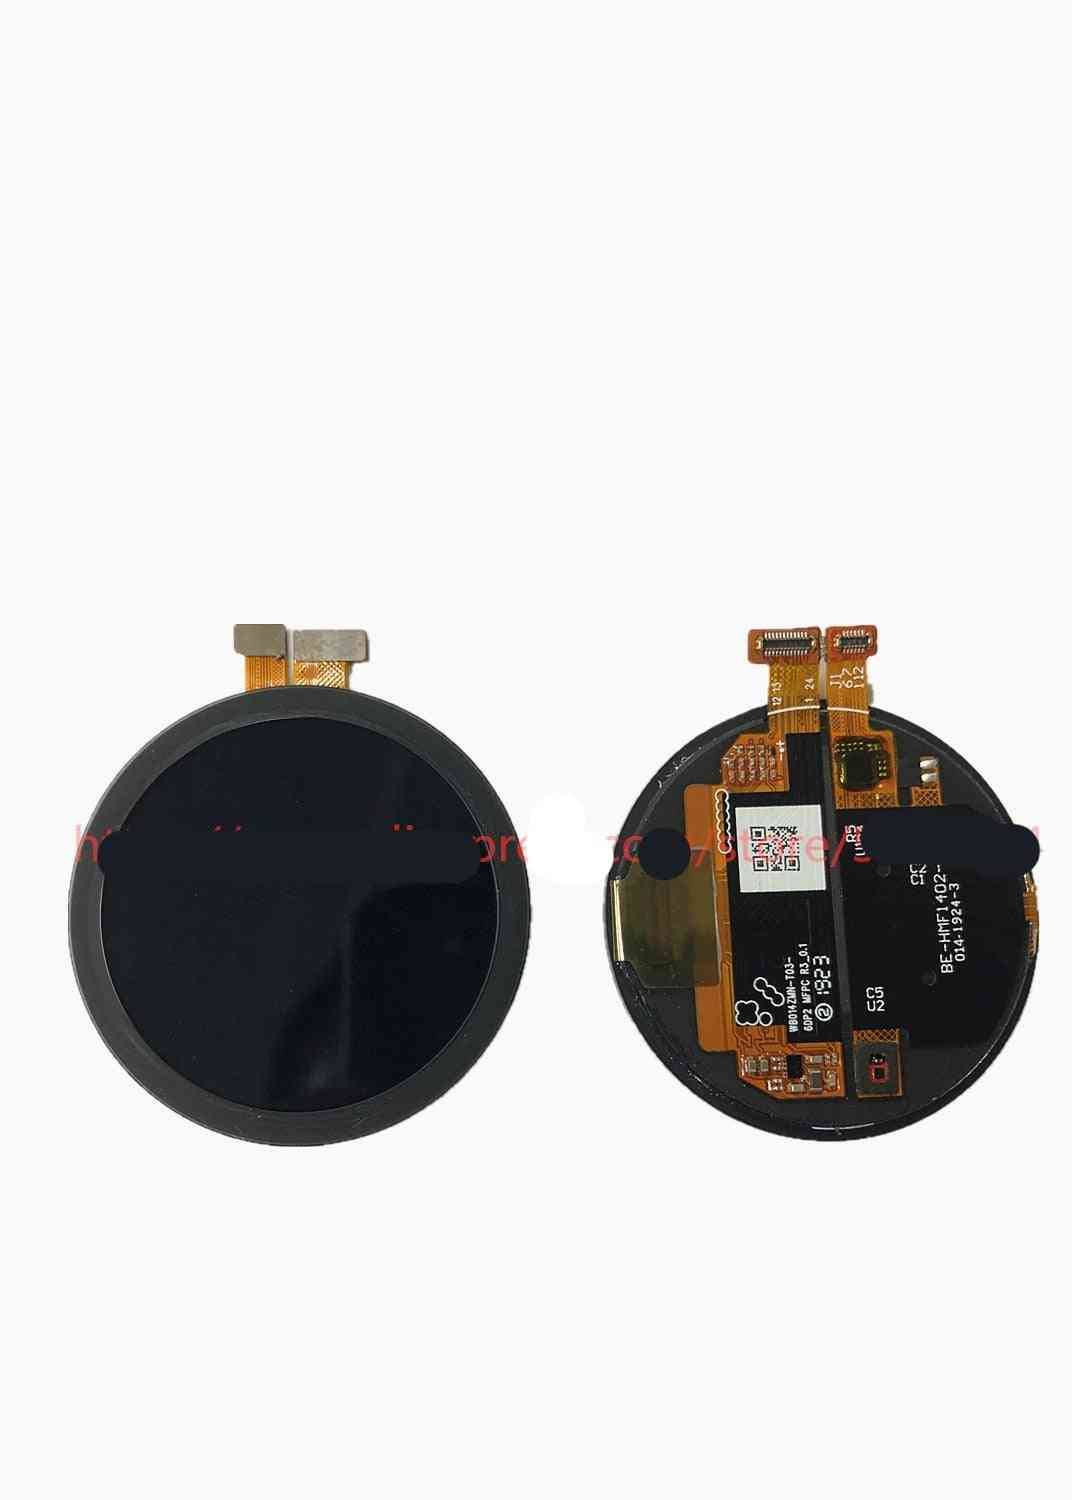 Smartwatch Lcd Display